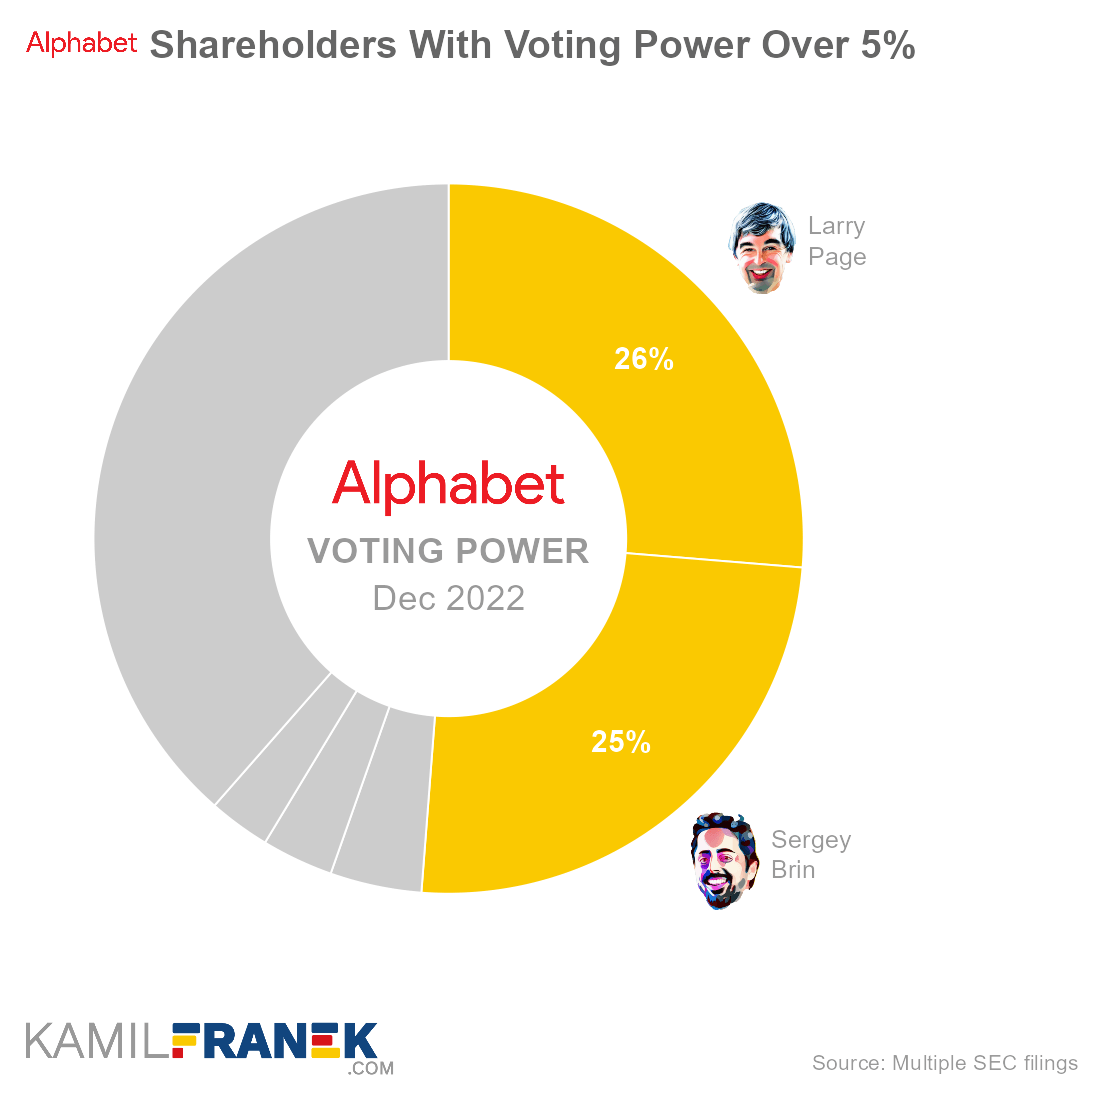 Alphabet largest shareholders by share ownership and vote control (donut chart)